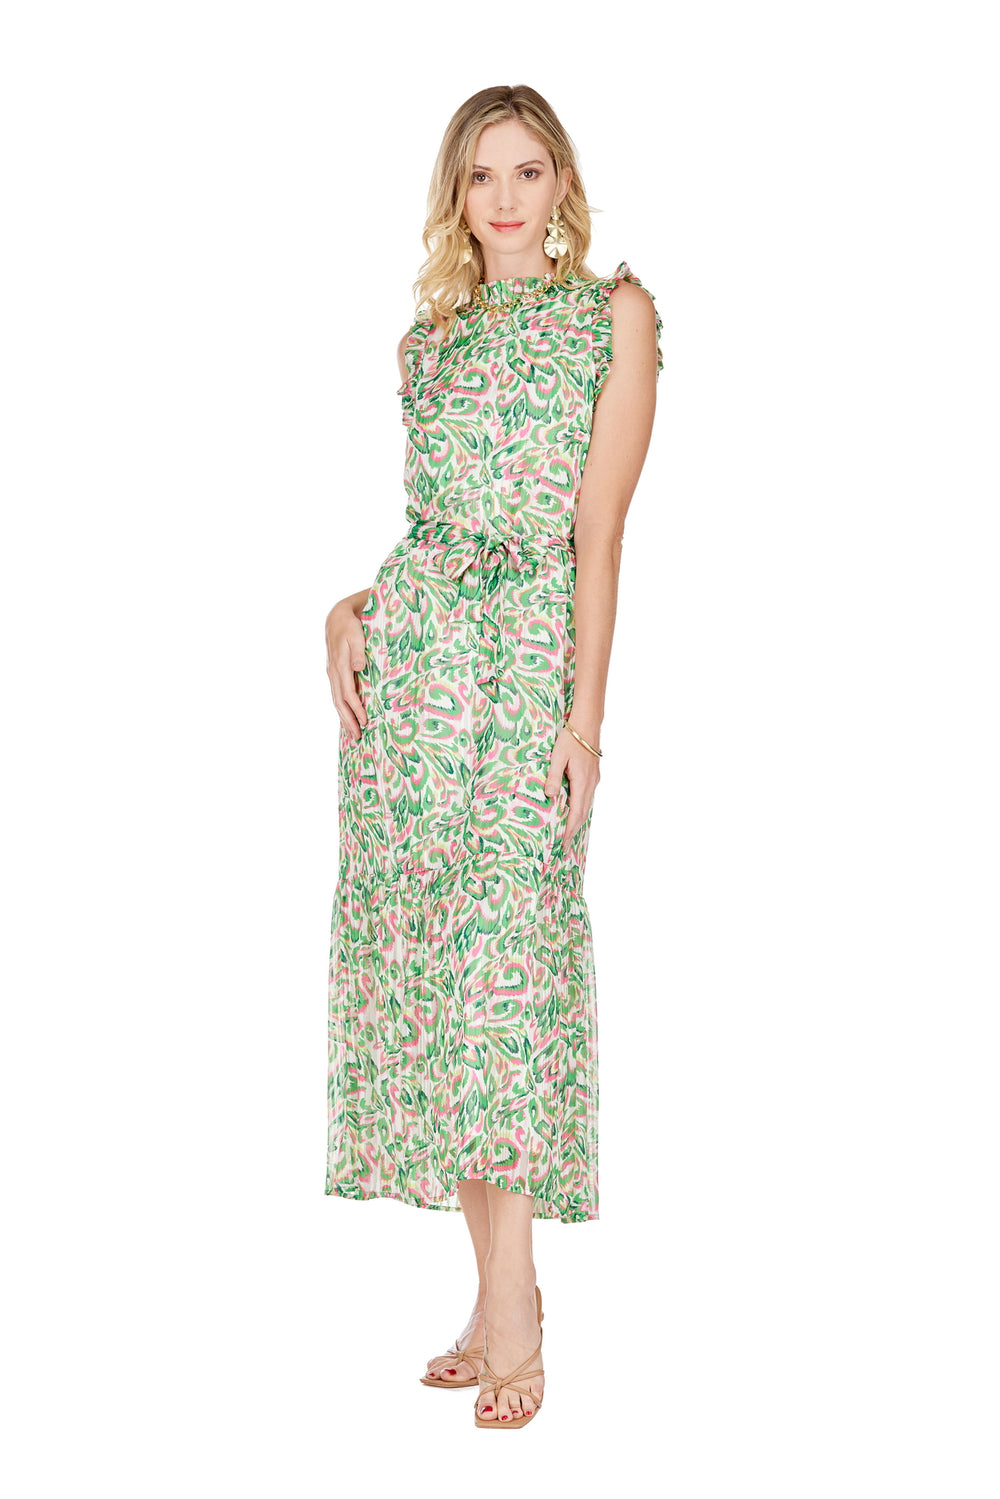 tres chic boutique maxi dress jade brand green and pink print online houston texas 